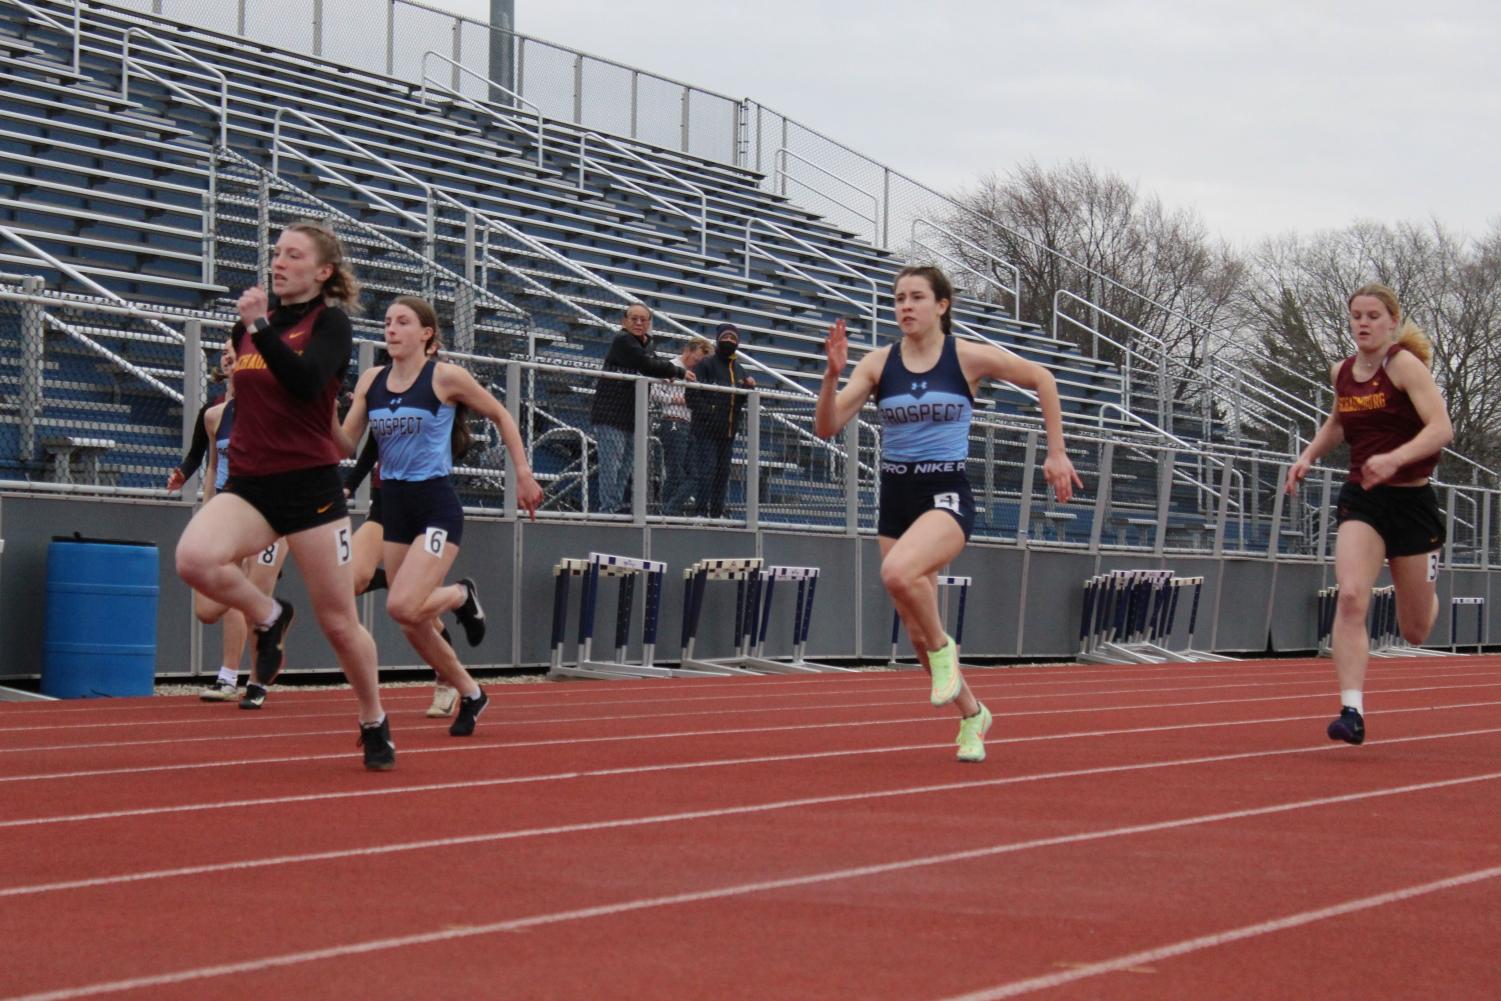 Emma Letzig and Kate Parisi compete in the 100 meter dash at a tri meet earlier in the season. (photo creds Alyssa Degan)